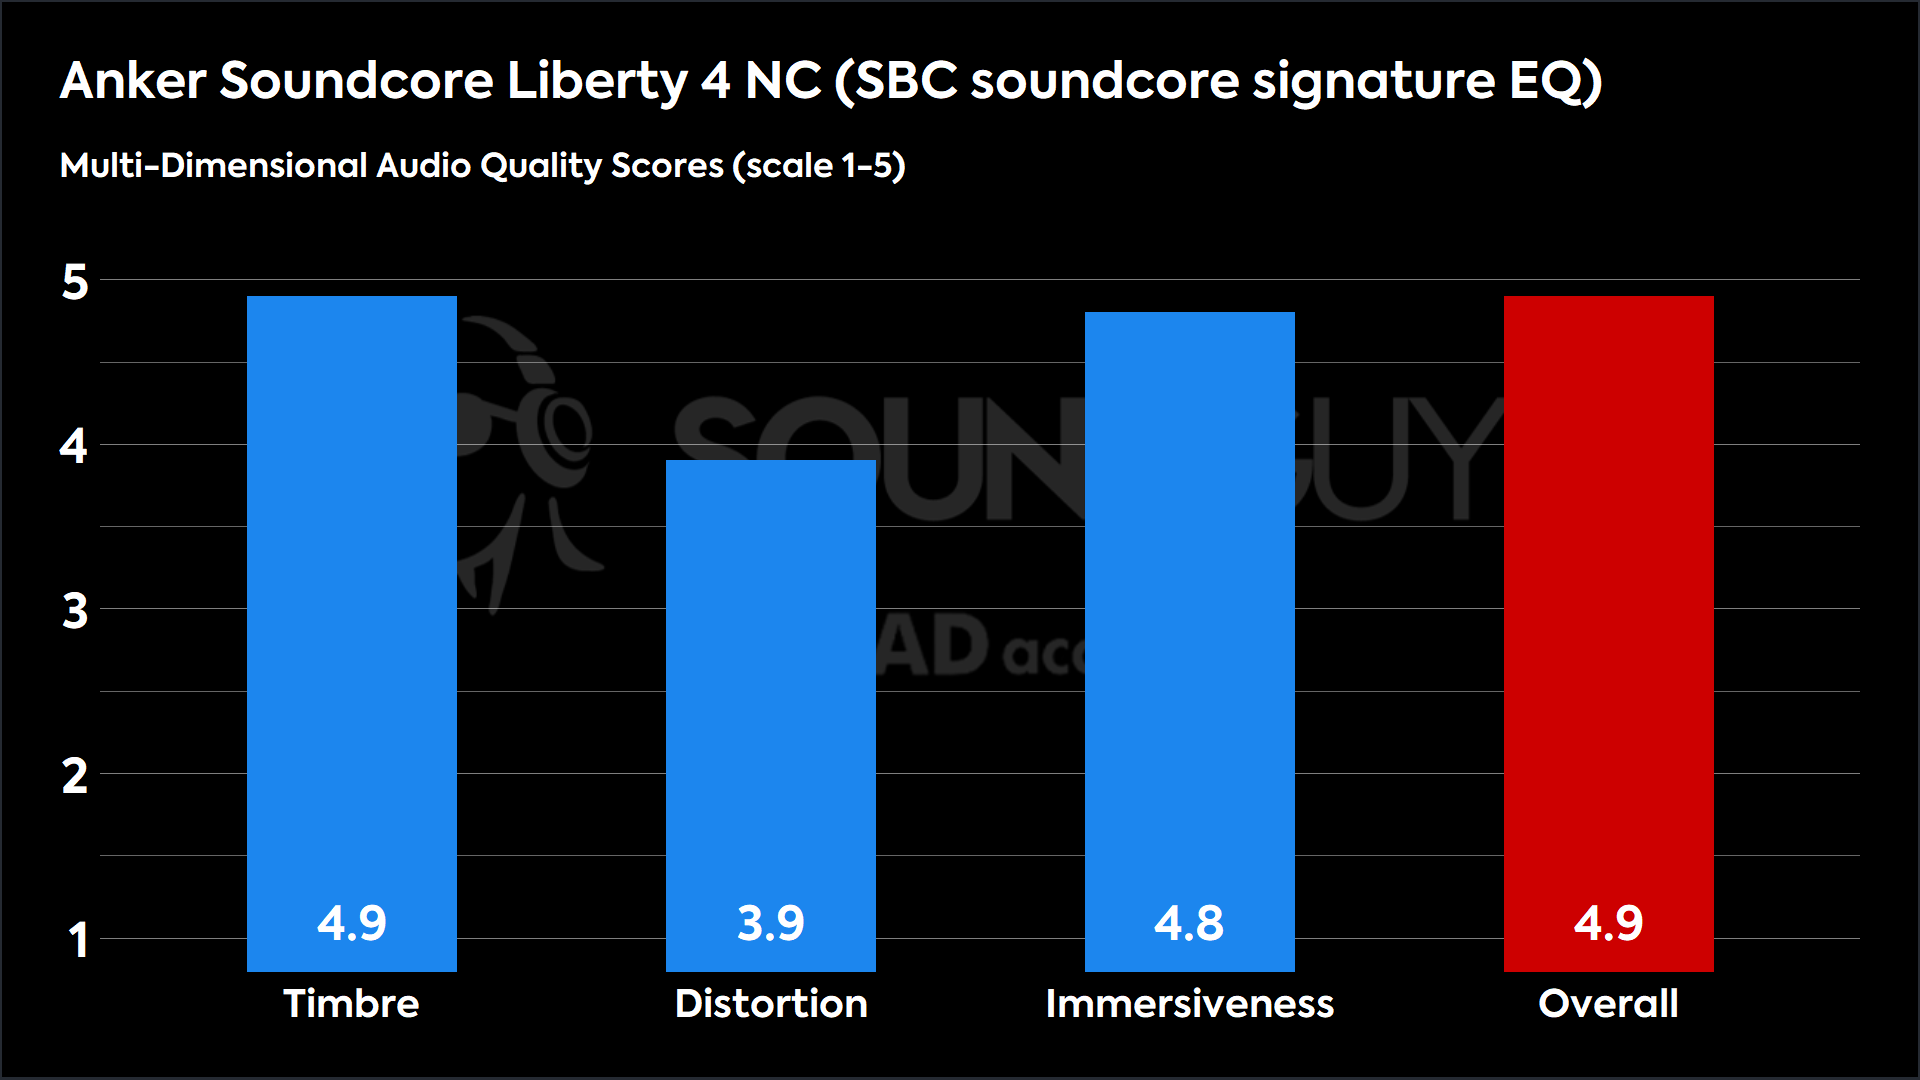 The chart shows the Anker Soundcore Liberty 4 NC (SBC soundcore signature EG) received a score of 4.9 for Timber, 3.9 for Distortion and 4.8 for Immersiveness, giving them an overall MDAQS score of 4.9.